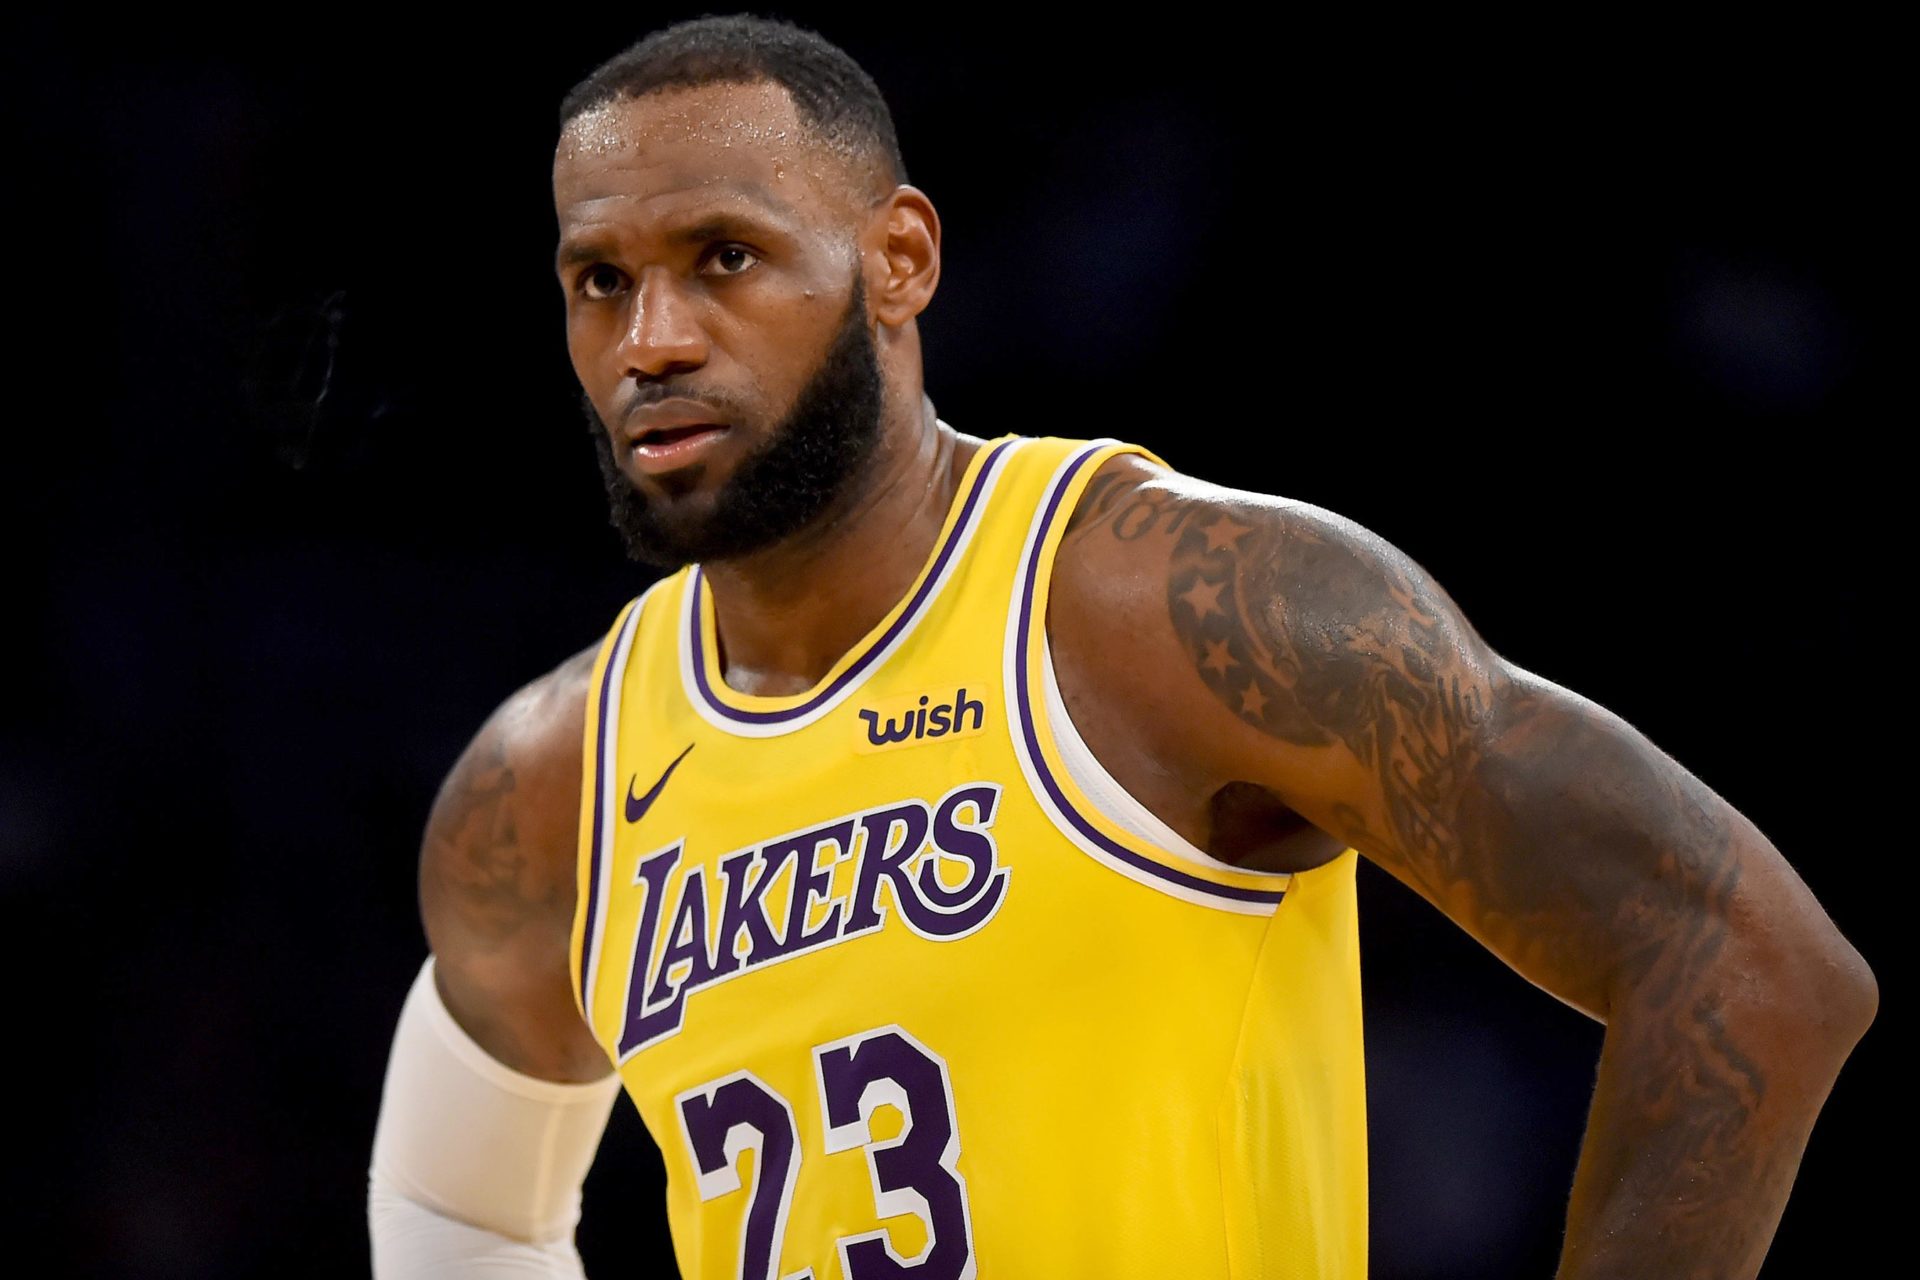 What is LeBron James's net worth?